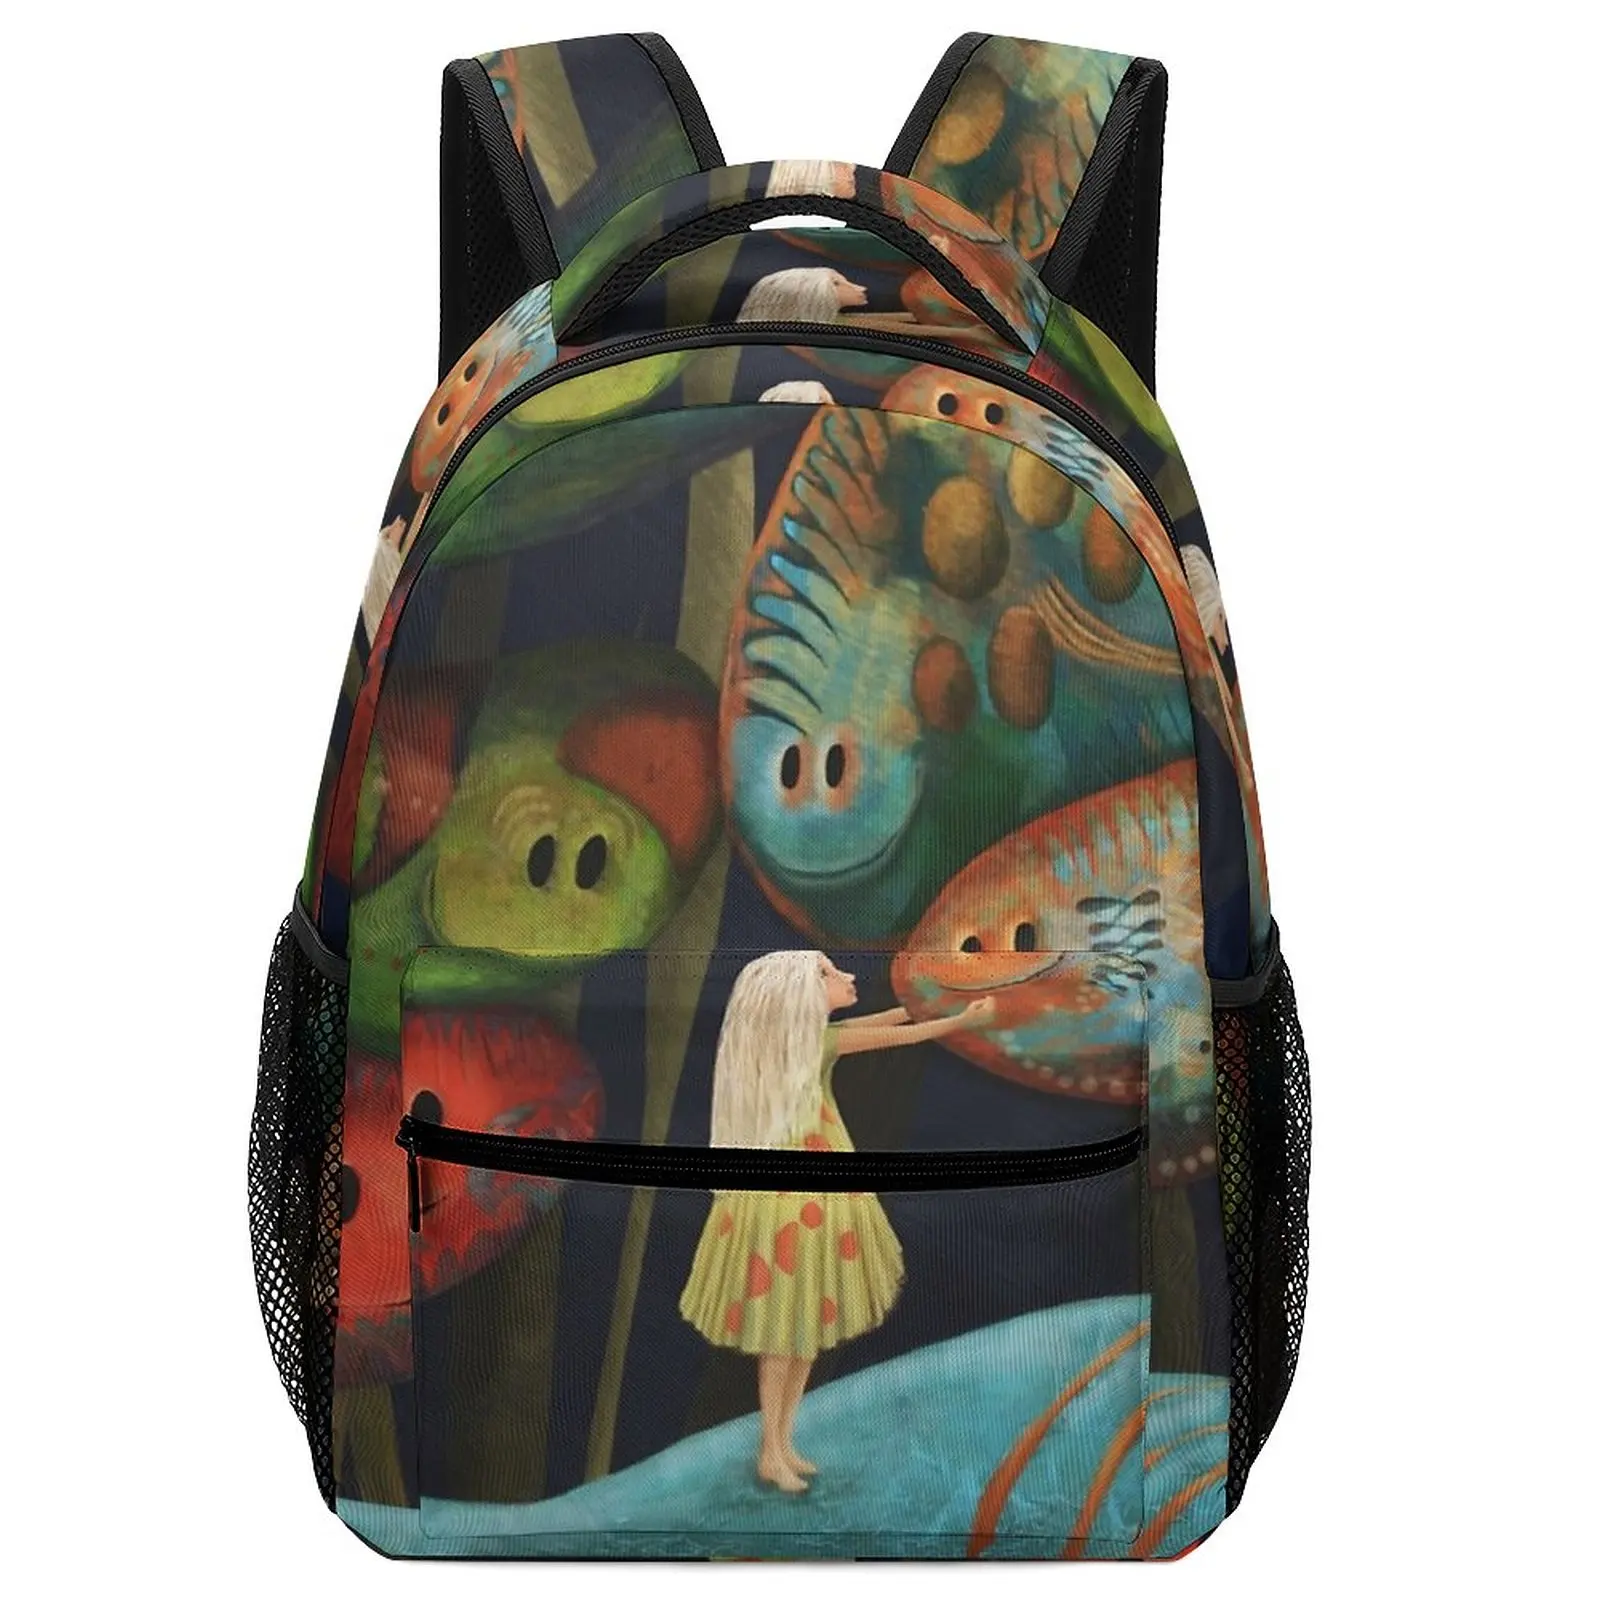 2022 New My Fascinating Friends Art Elementary Student Bag for Girls Boys School Bags for Teenagers Black Backpack Korean Style